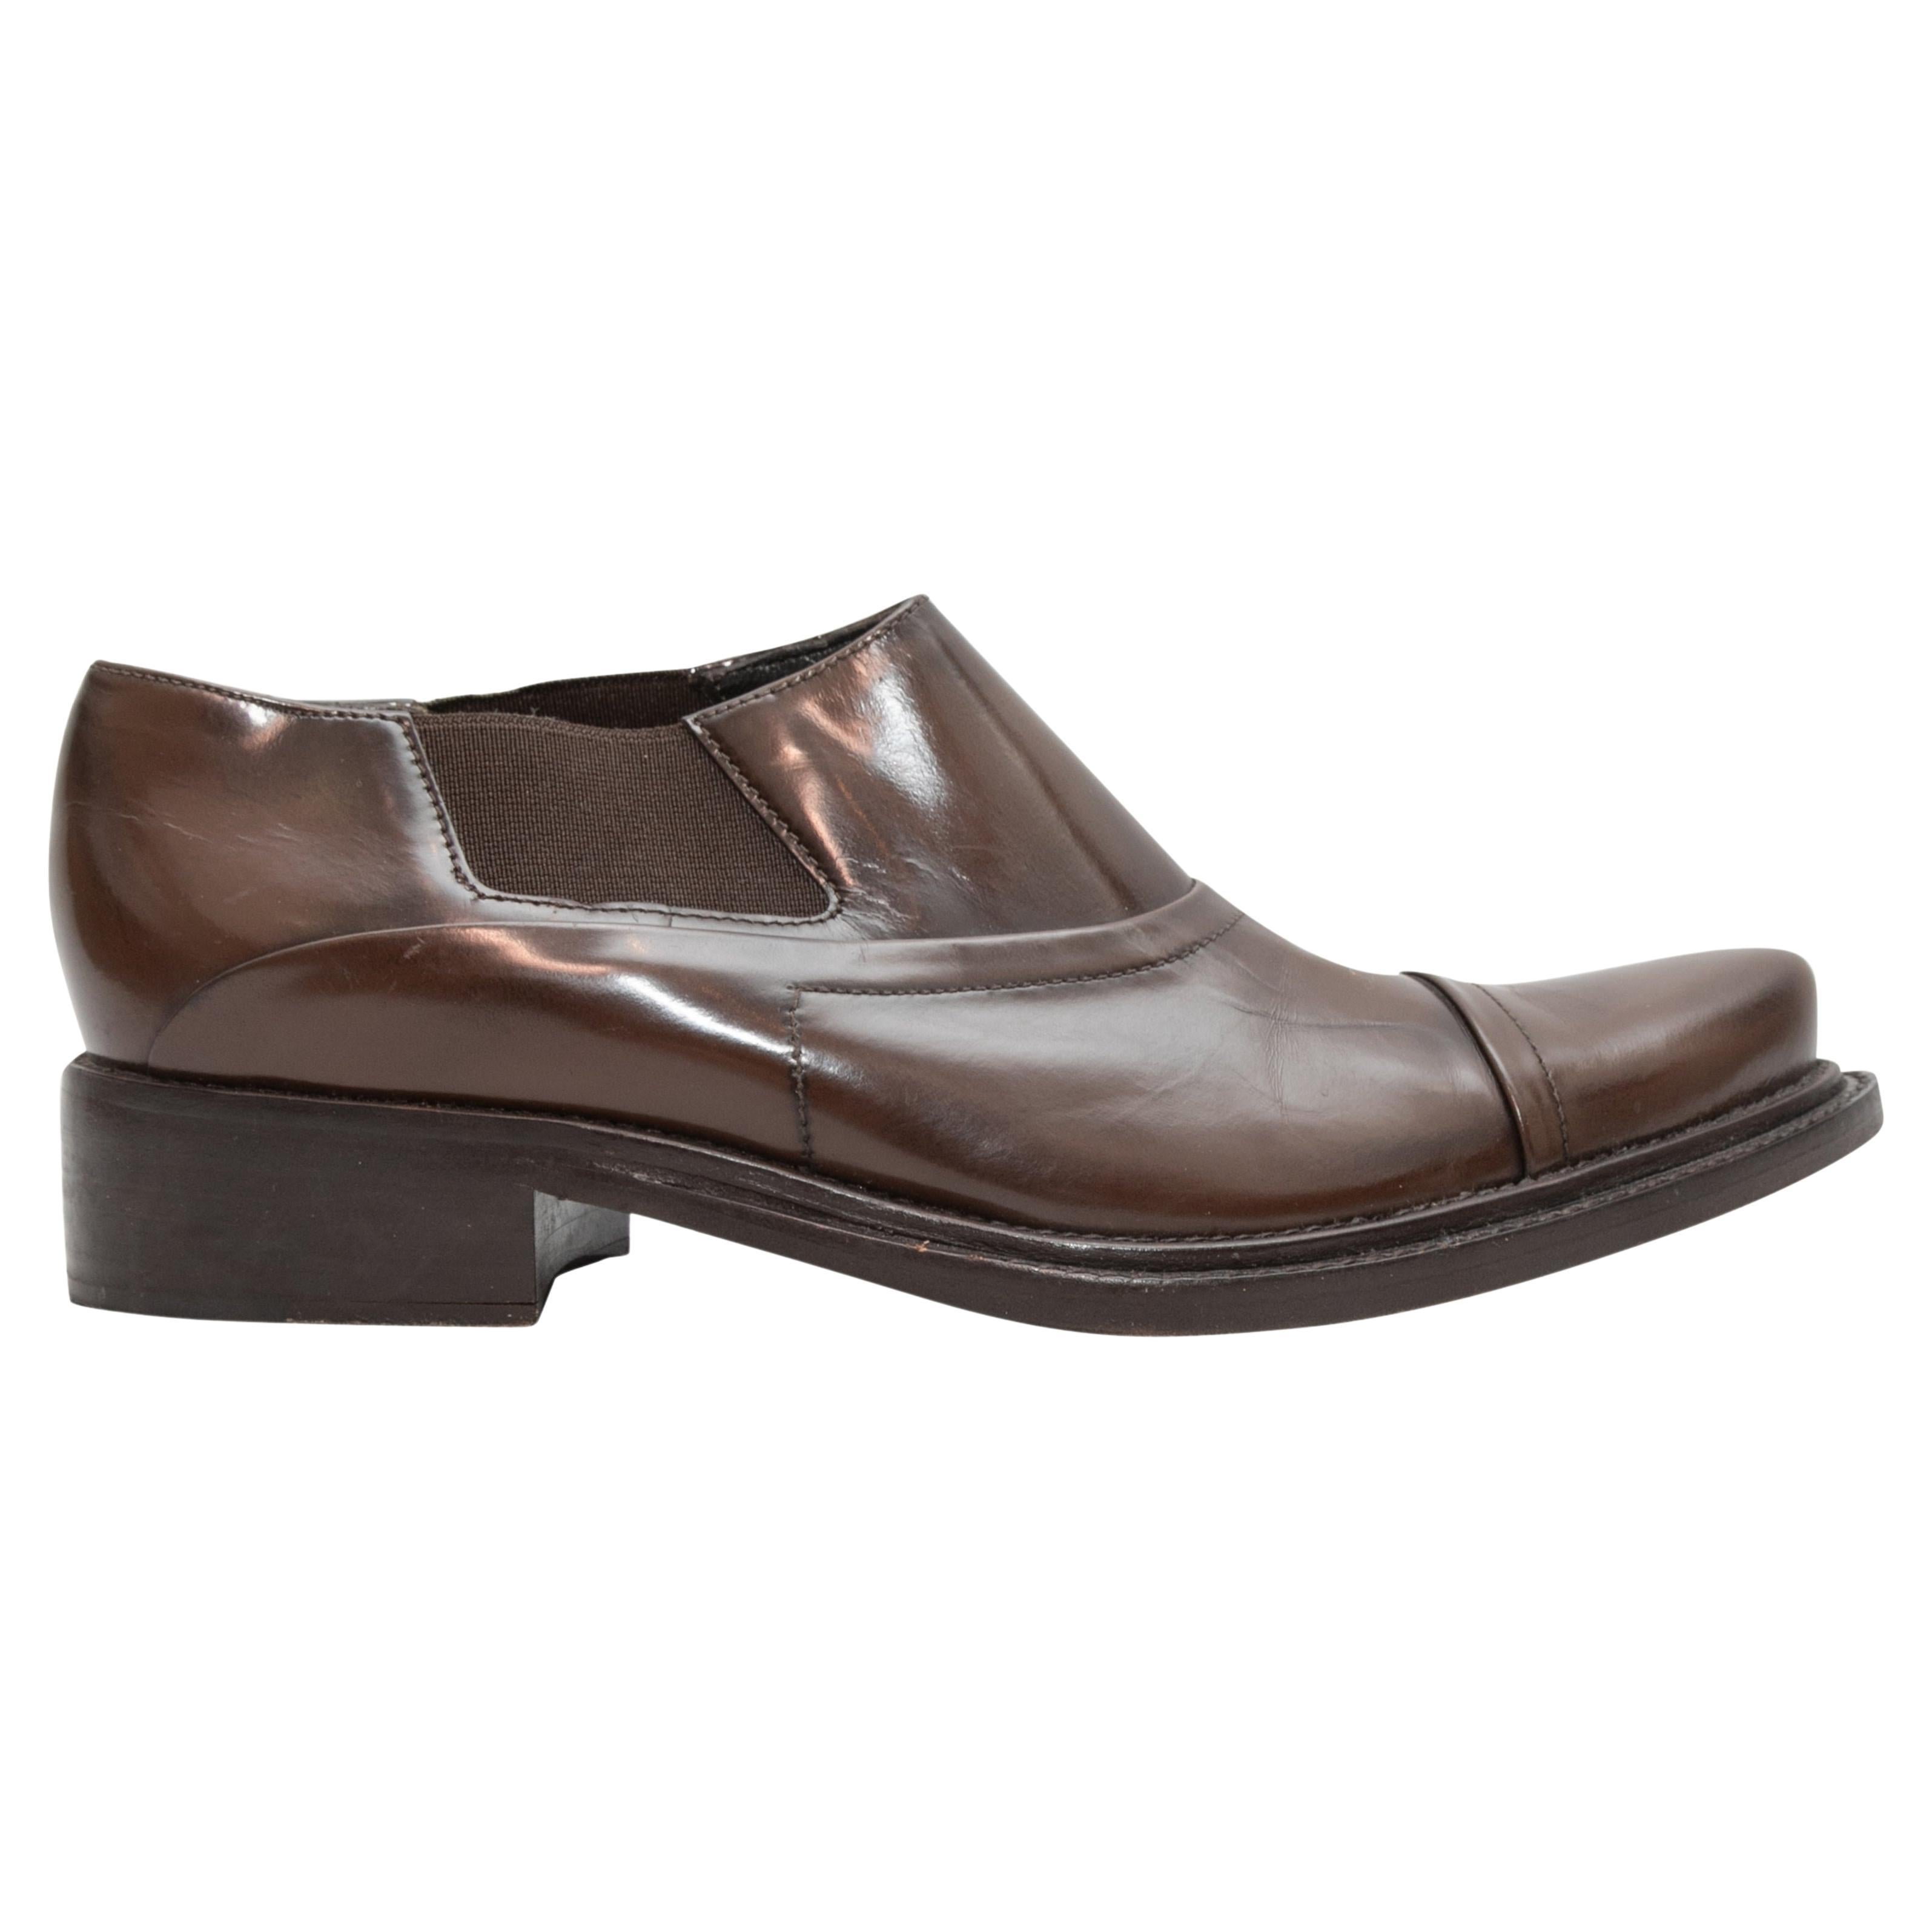 Brown Prada Leather Dress Shoes Size 37.5 For Sale